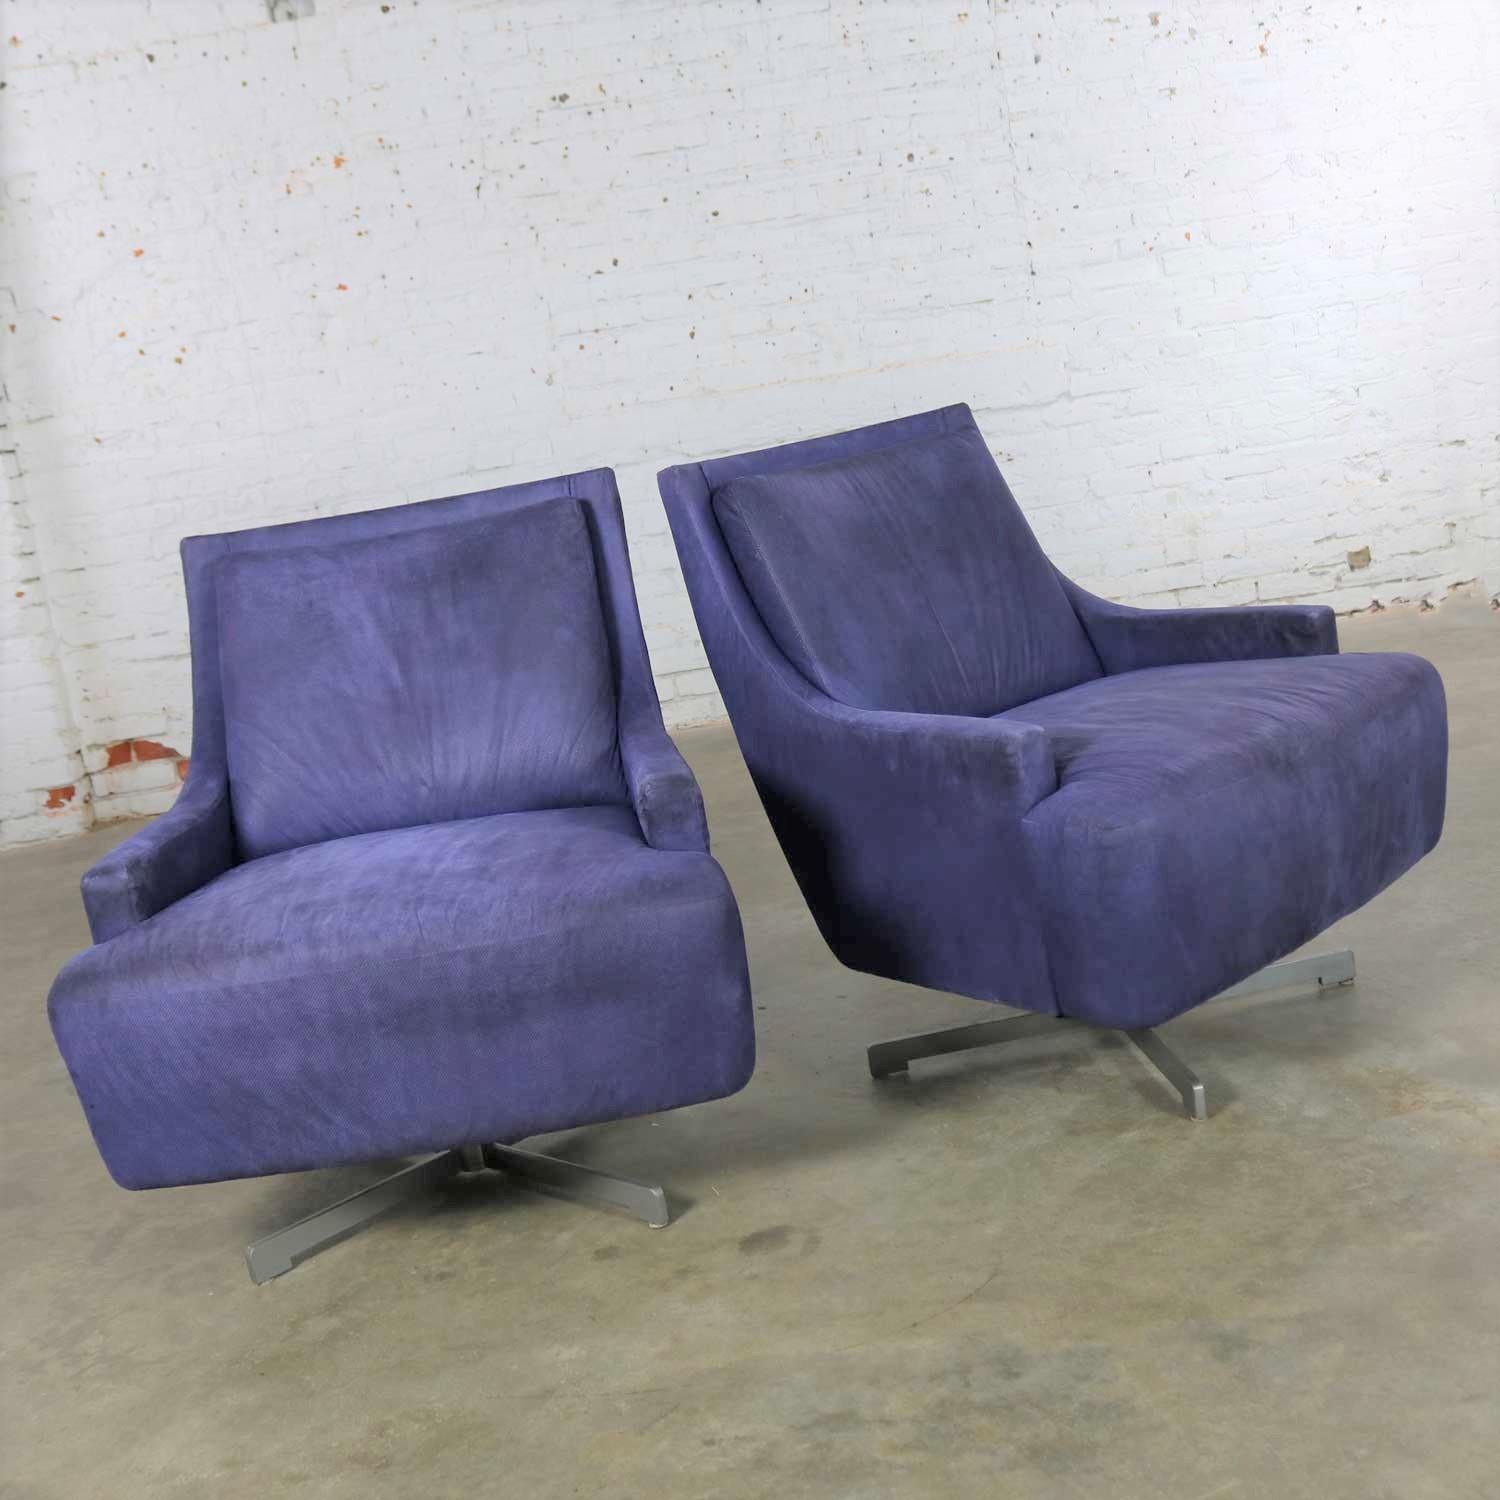 Handsome pair of Scoop swivel lounge chairs with a metal base by Barbara Barry for HBF. This pair is in wonderful vintage condition as far as the base, frame and stability are concerned. However, the aubergine colored upholstery, even though we have